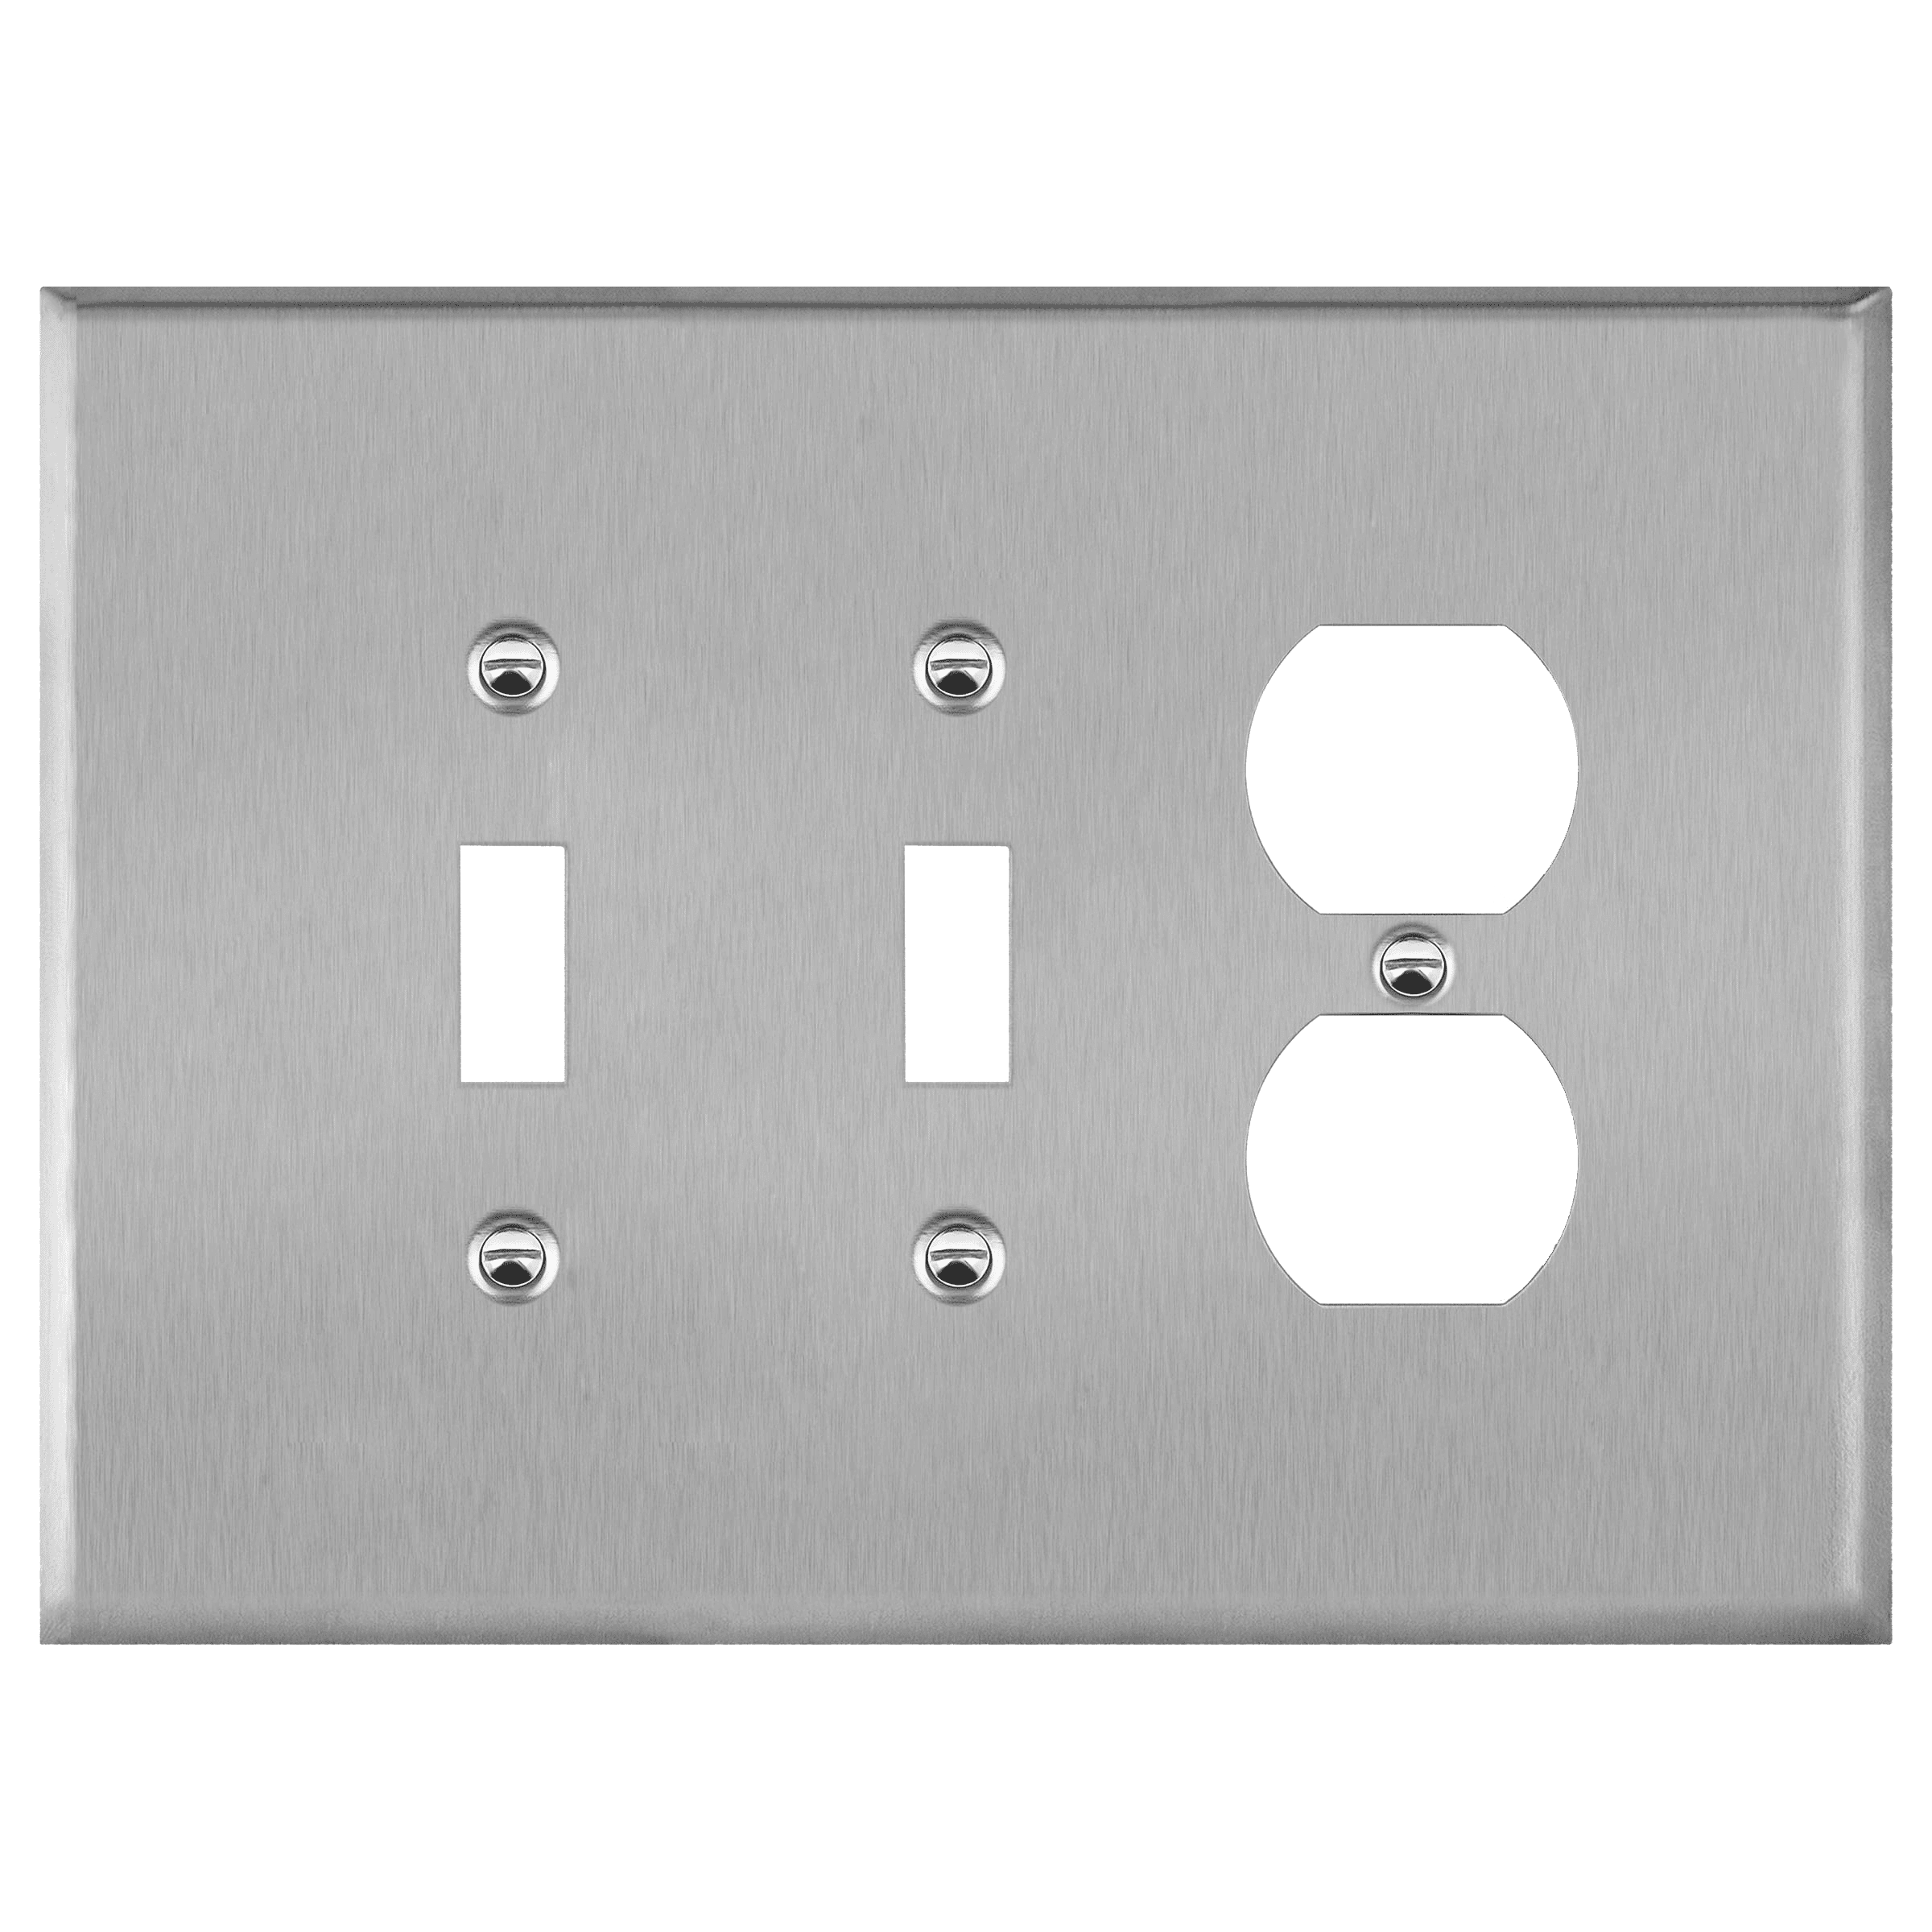 Combination Two Toggle-One Duplex Receptacle Metal Wall Plate 430 Stainless Steel